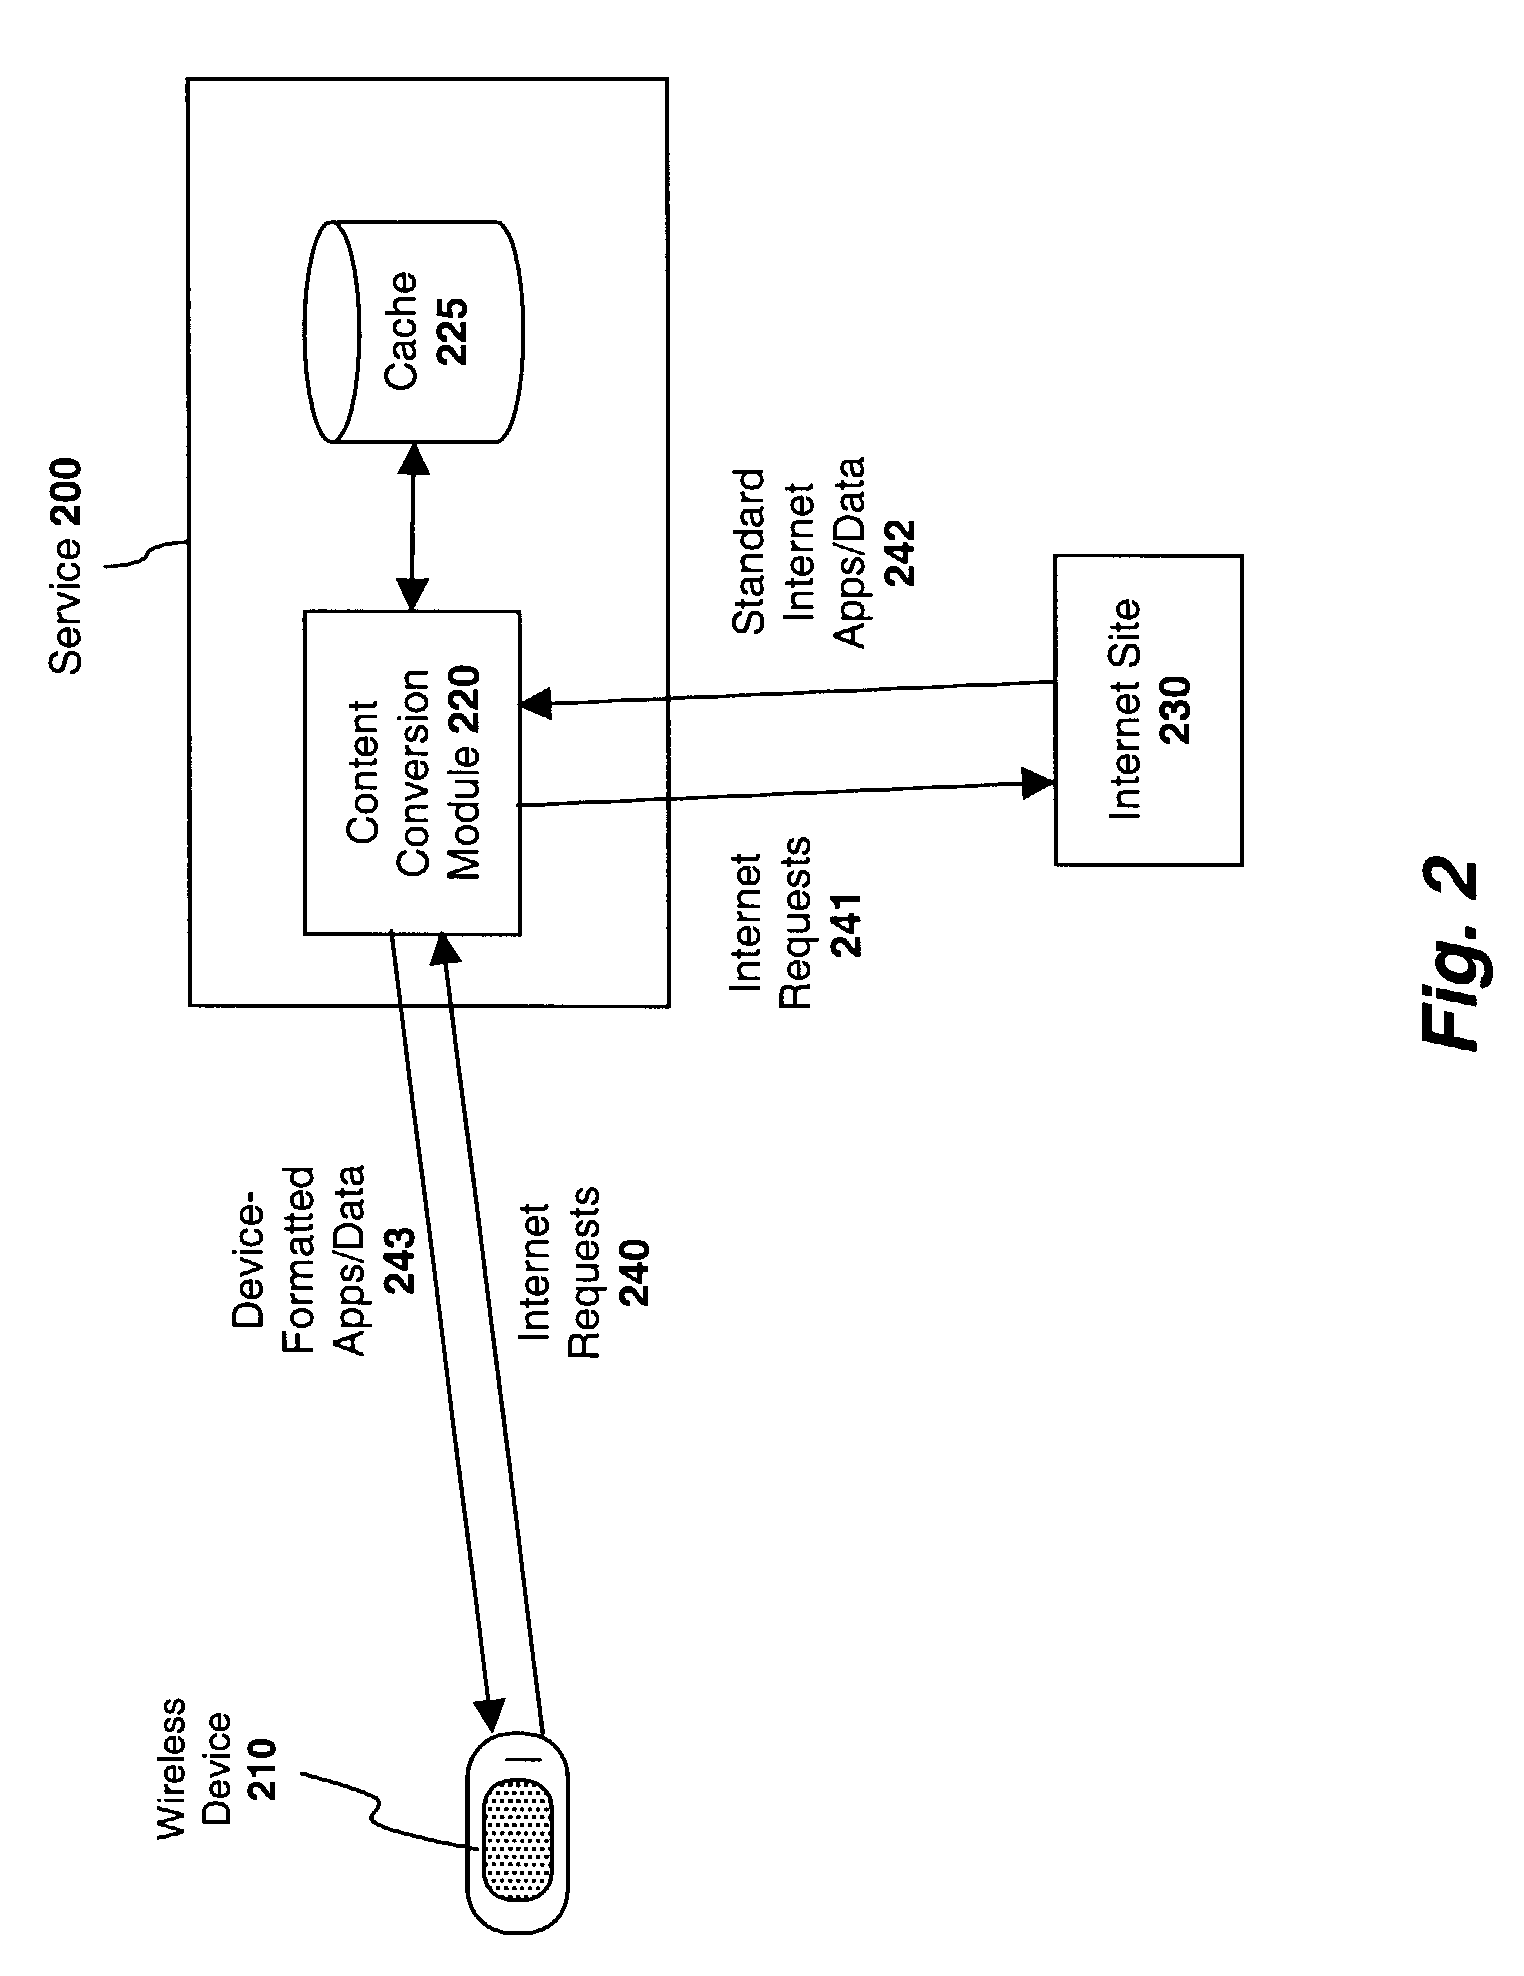 Instant messaging proxy apparatus and method